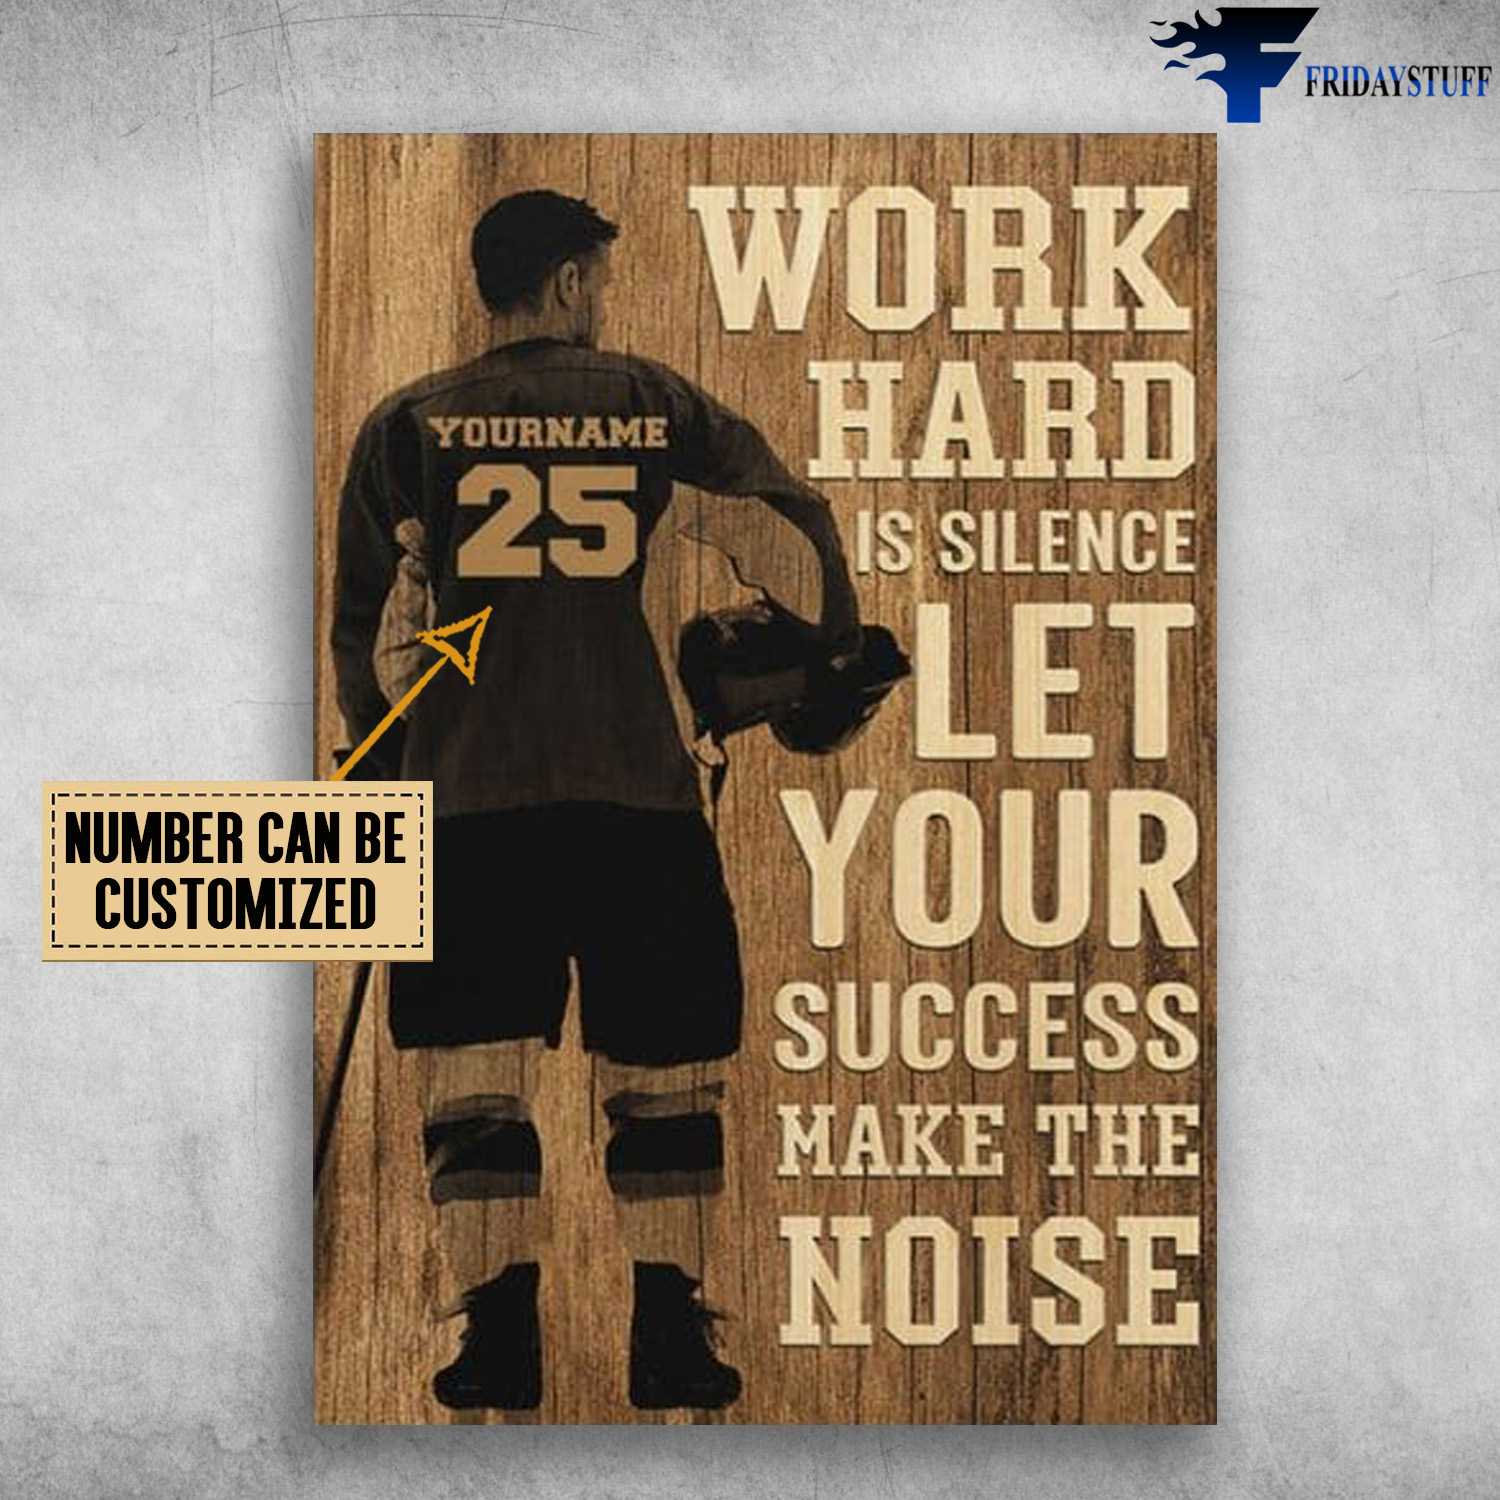 Hockey Poster, Hockey Lover, Work Hard Is Cilence, Let Your Success, Make The Noise